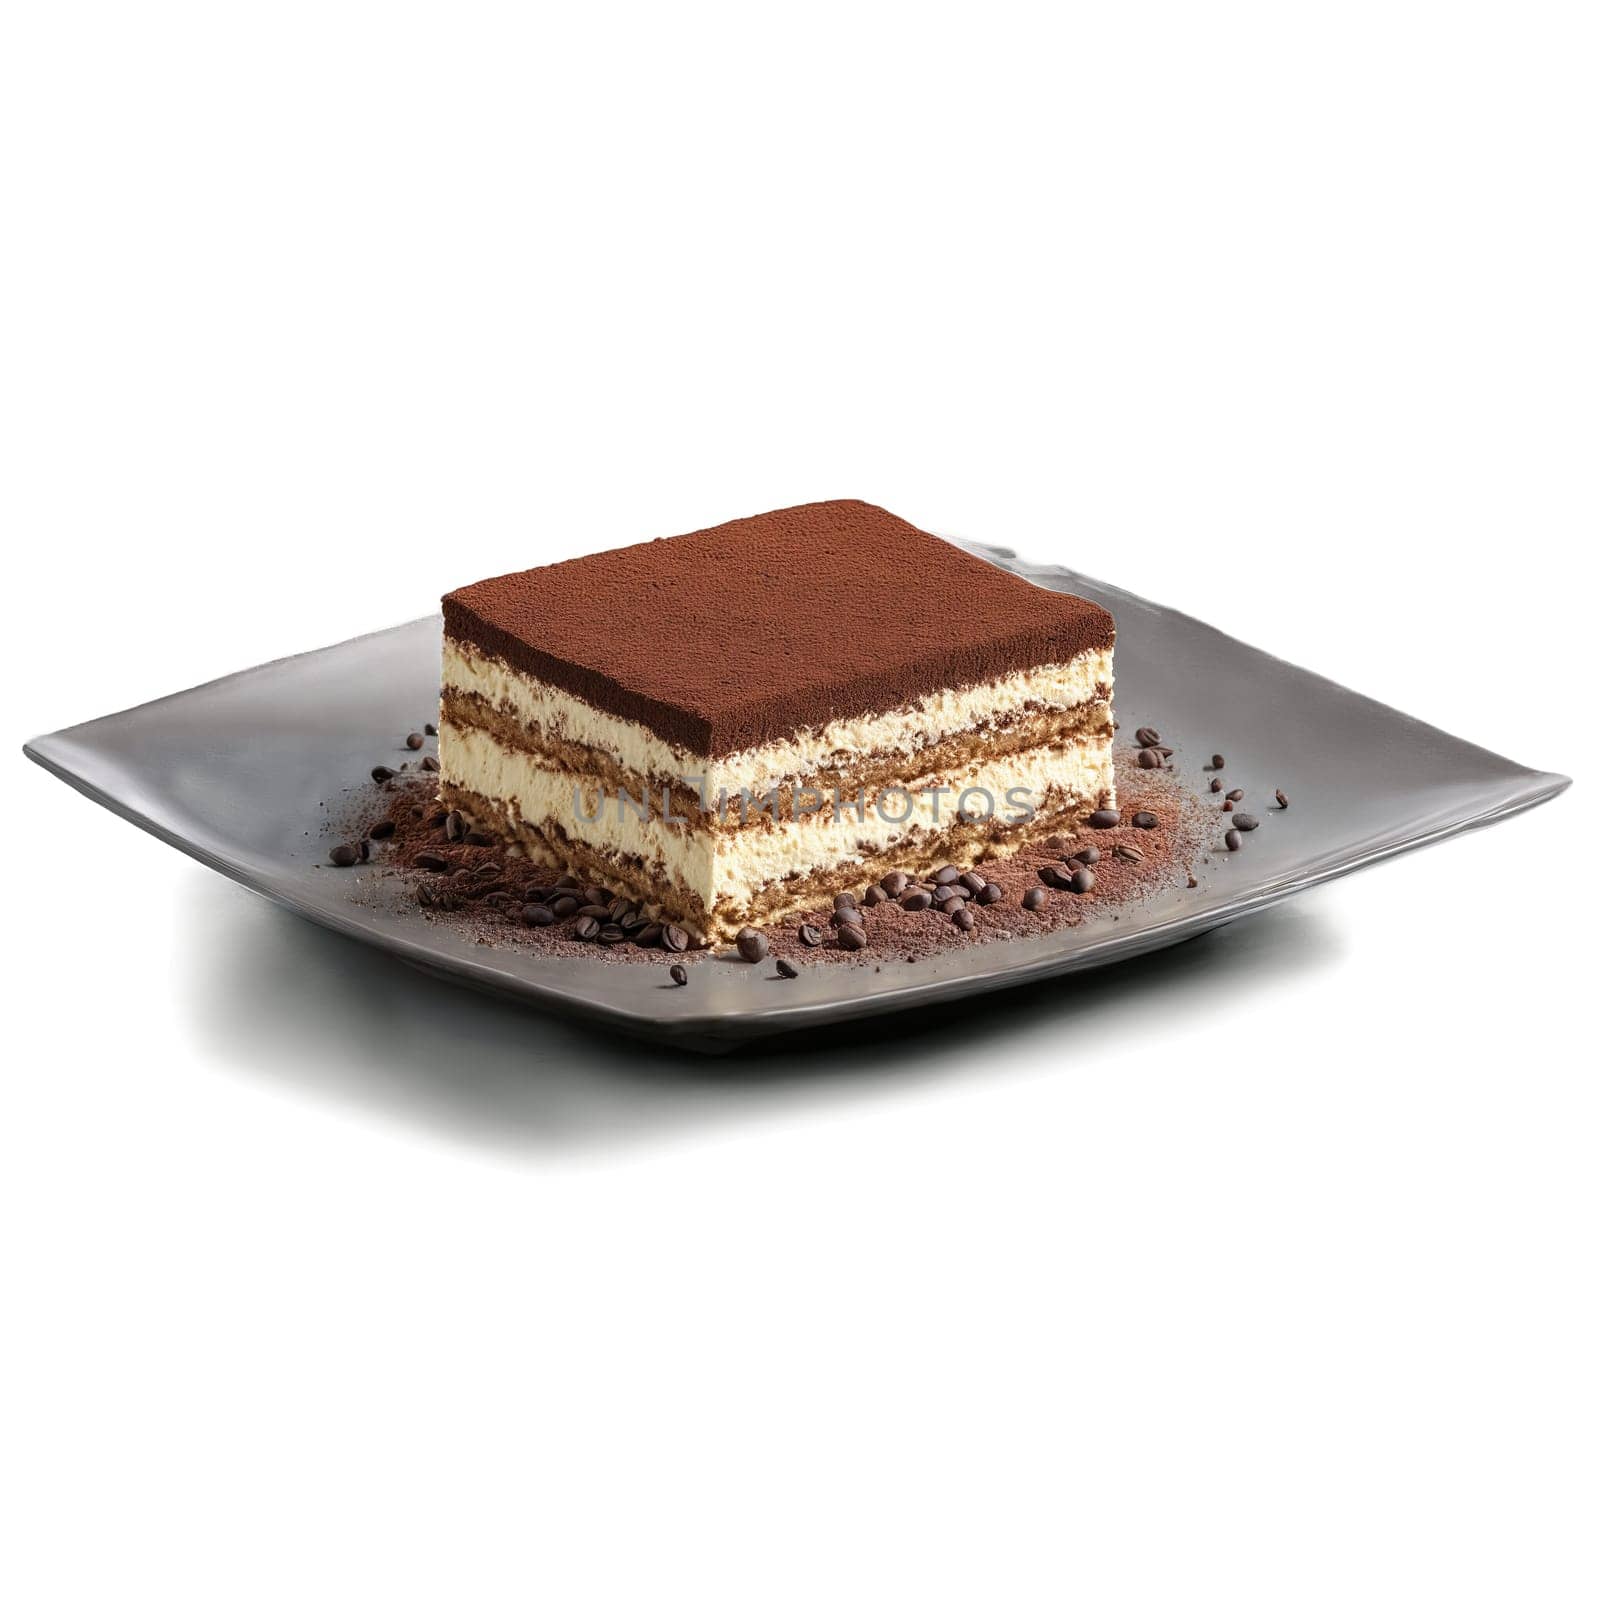 Tiramisu with cocoa powder dusting and coffee splash in background Food and culinary concept. Food isolated on transparent background.